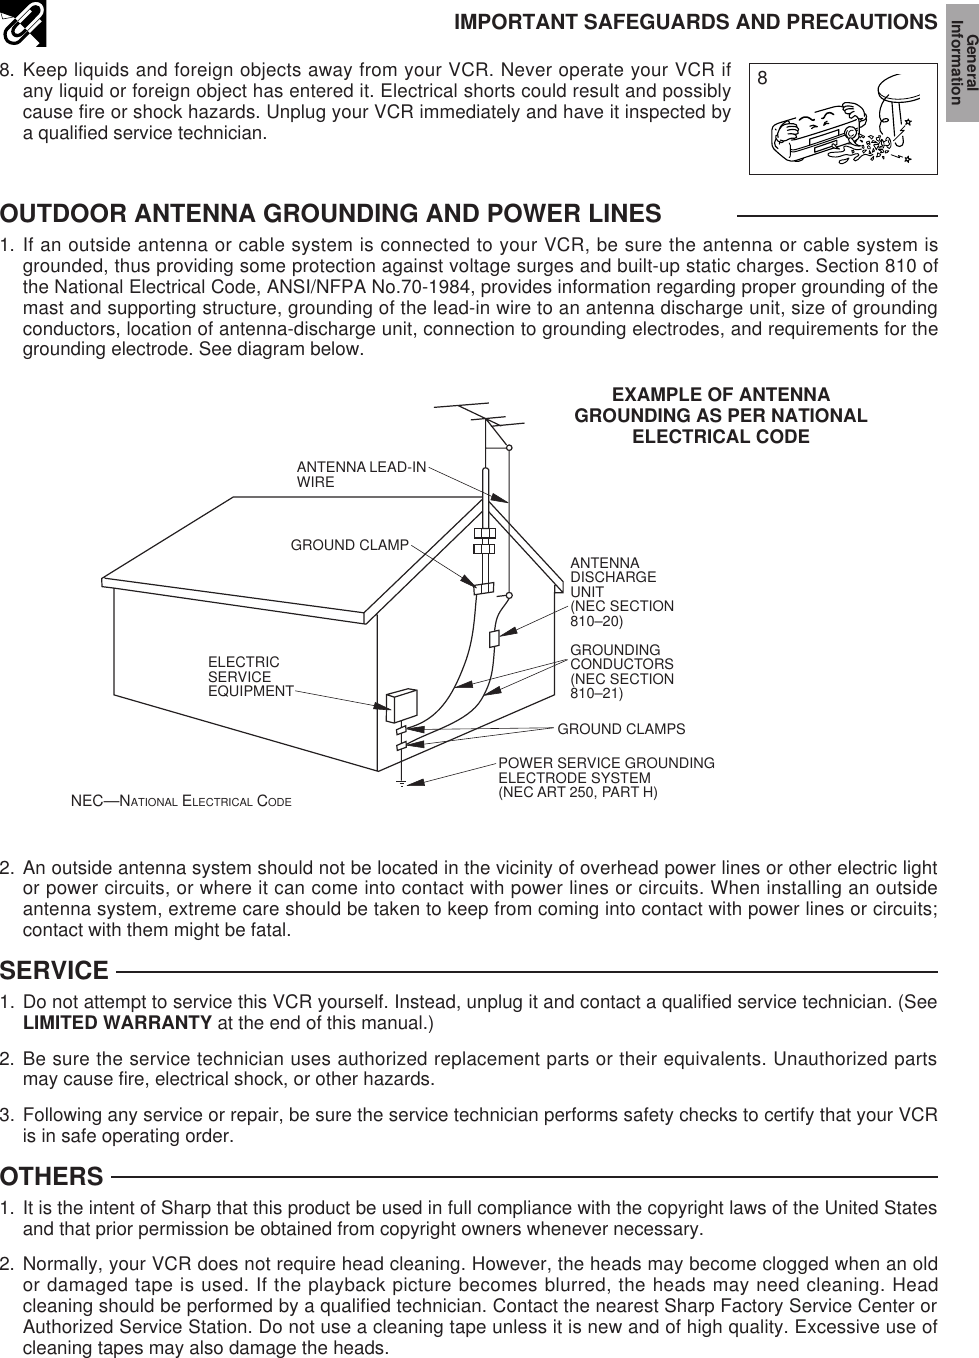 2. An outside antenna system should not be located in the vicinity of overhead power lines or other electric lightor power circuits, or where it can come into contact with power lines or circuits. When installing an outsideantenna system, extreme care should be taken to keep from coming into contact with power lines or circuits;contact with them might be fatal.SERVICE1. Do not attempt to service this VCR yourself. Instead, unplug it and contact a qualified service technician. (SeeLIMITED WARRANTY at the end of this manual.)2. Be sure the service technician uses authorized replacement parts or their equivalents. Unauthorized partsmay cause fire, electrical shock, or other hazards.3. Following any service or repair, be sure the service technician performs safety checks to certify that your VCRis in safe operating order.OTHERS1. It is the intent of Sharp that this product be used in full compliance with the copyright laws of the United Statesand that prior permission be obtained from copyright owners whenever necessary.2. Normally, your VCR does not require head cleaning. However, the heads may become clogged when an oldor damaged tape is used. If the playback picture becomes blurred, the heads may need cleaning. Headcleaning should be performed by a qualified technician. Contact the nearest Sharp Factory Service Center orAuthorized Service Station. Do not use a cleaning tape unless it is new and of high quality. Excessive use ofcleaning tapes may also damage the heads.88. Keep liquids and foreign objects away from your VCR. Never operate your VCR ifany liquid or foreign object has entered it. Electrical shorts could result and possiblycause fire or shock hazards. Unplug your VCR immediately and have it inspected bya qualified service technician.IMPORTANT SAFEGUARDS AND PRECAUTIONSOUTDOOR ANTENNA GROUNDING AND POWER LINES1. If an outside antenna or cable system is connected to your VCR, be sure the antenna or cable system isgrounded, thus providing some protection against voltage surges and built-up static charges. Section 810 ofthe National Electrical Code, ANSI/NFPA No.70-1984, provides information regarding proper grounding of themast and supporting structure, grounding of the lead-in wire to an antenna discharge unit, size of groundingconductors, location of antenna-discharge unit, connection to grounding electrodes, and requirements for thegrounding electrode. See diagram below.EXAMPLE OF ANTENNAGROUNDING AS PER NATIONALELECTRICAL CODENEC—NATIONAL ELECTRICAL CODEANTENNA LEAD-IN WIREELECTRICSERVICEEQUIPMENTANTENNADISCHARGEUNIT(NEC SECTION810–20)GROUNDINGCONDUCTORS(NEC SECTION810–21)GROUND CLAMPSPOWER SERVICE GROUNDINGELECTRODE SYSTEM(NEC ART 250, PART H)GROUND CLAMPGeneralInformation